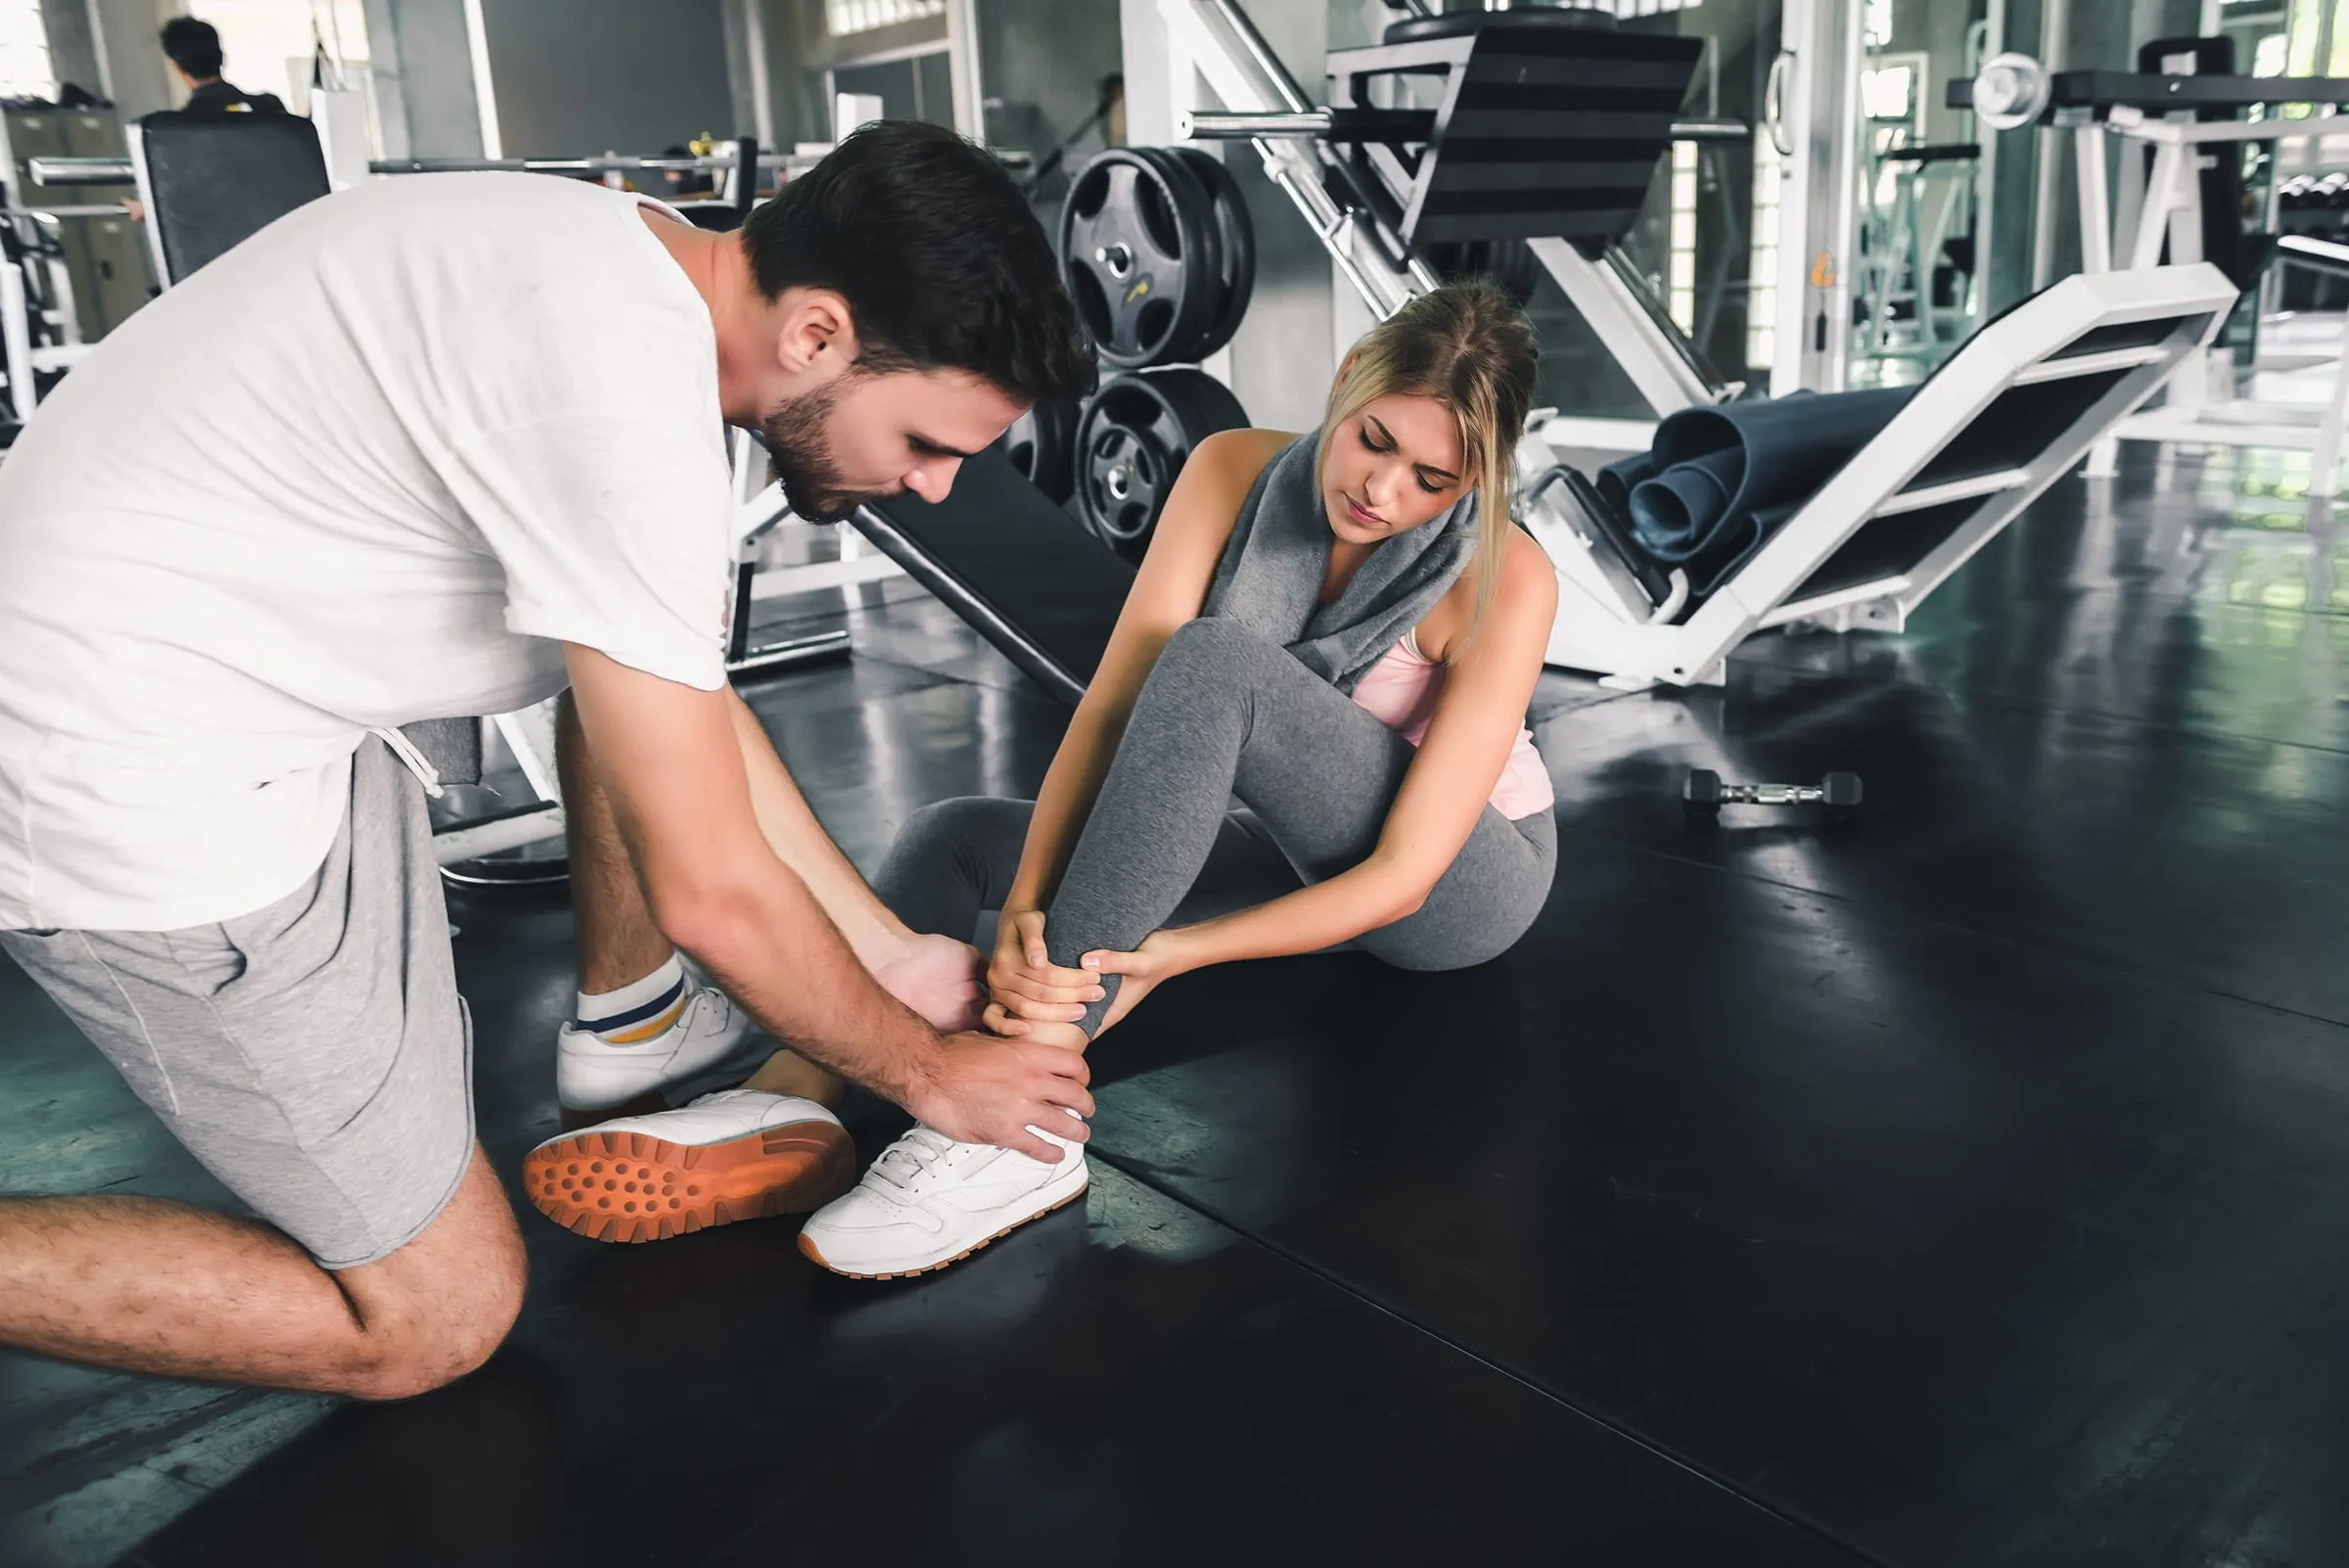 Man helping injured woman in the gym. If you’ve sustained an injury, contact our personal injury attorneys in Casper, WY now.